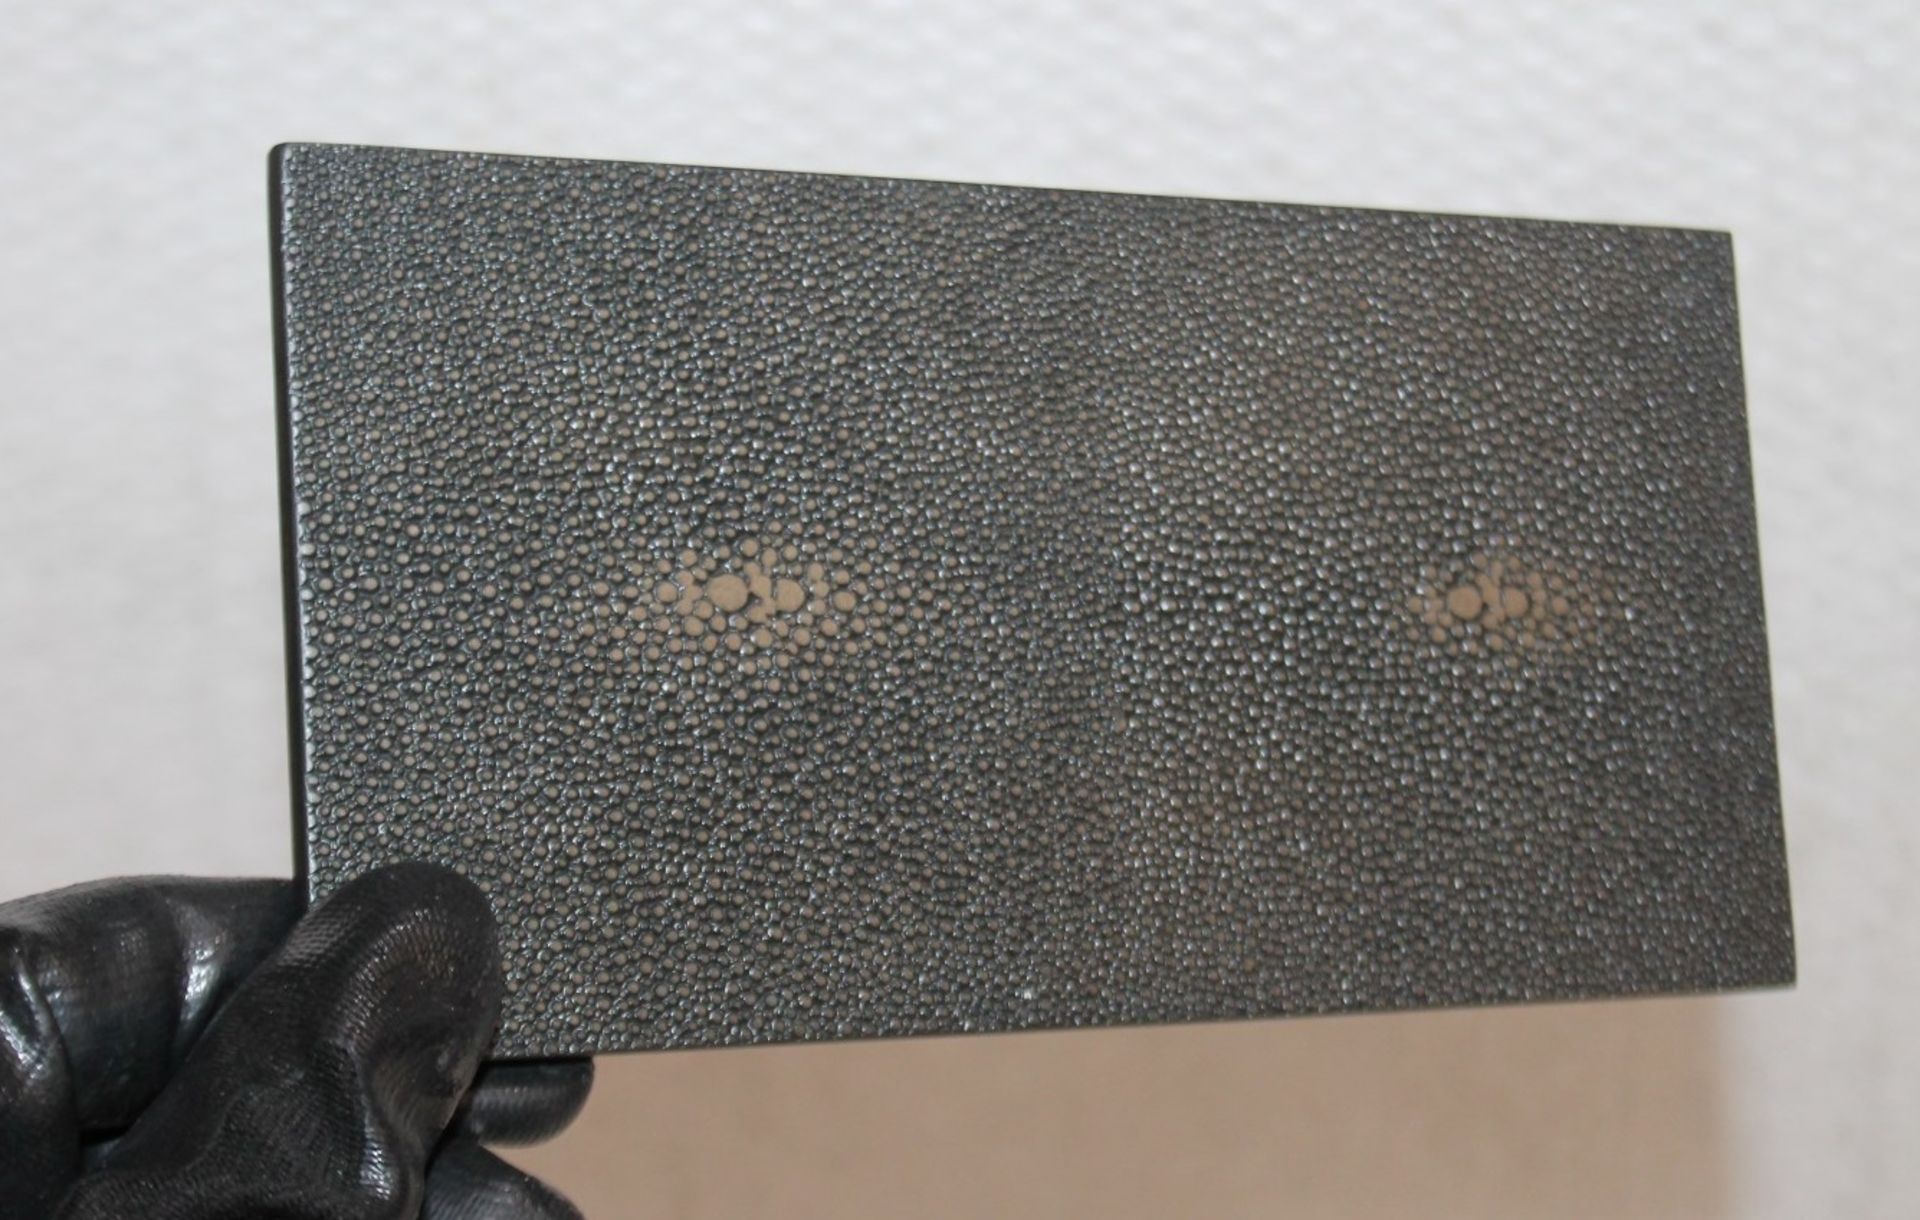 6 x POSH TRADING COMPANY Coastbox with Faux Shagreen Double Coaster Serving Mats - Original Price £ - Image 2 of 6